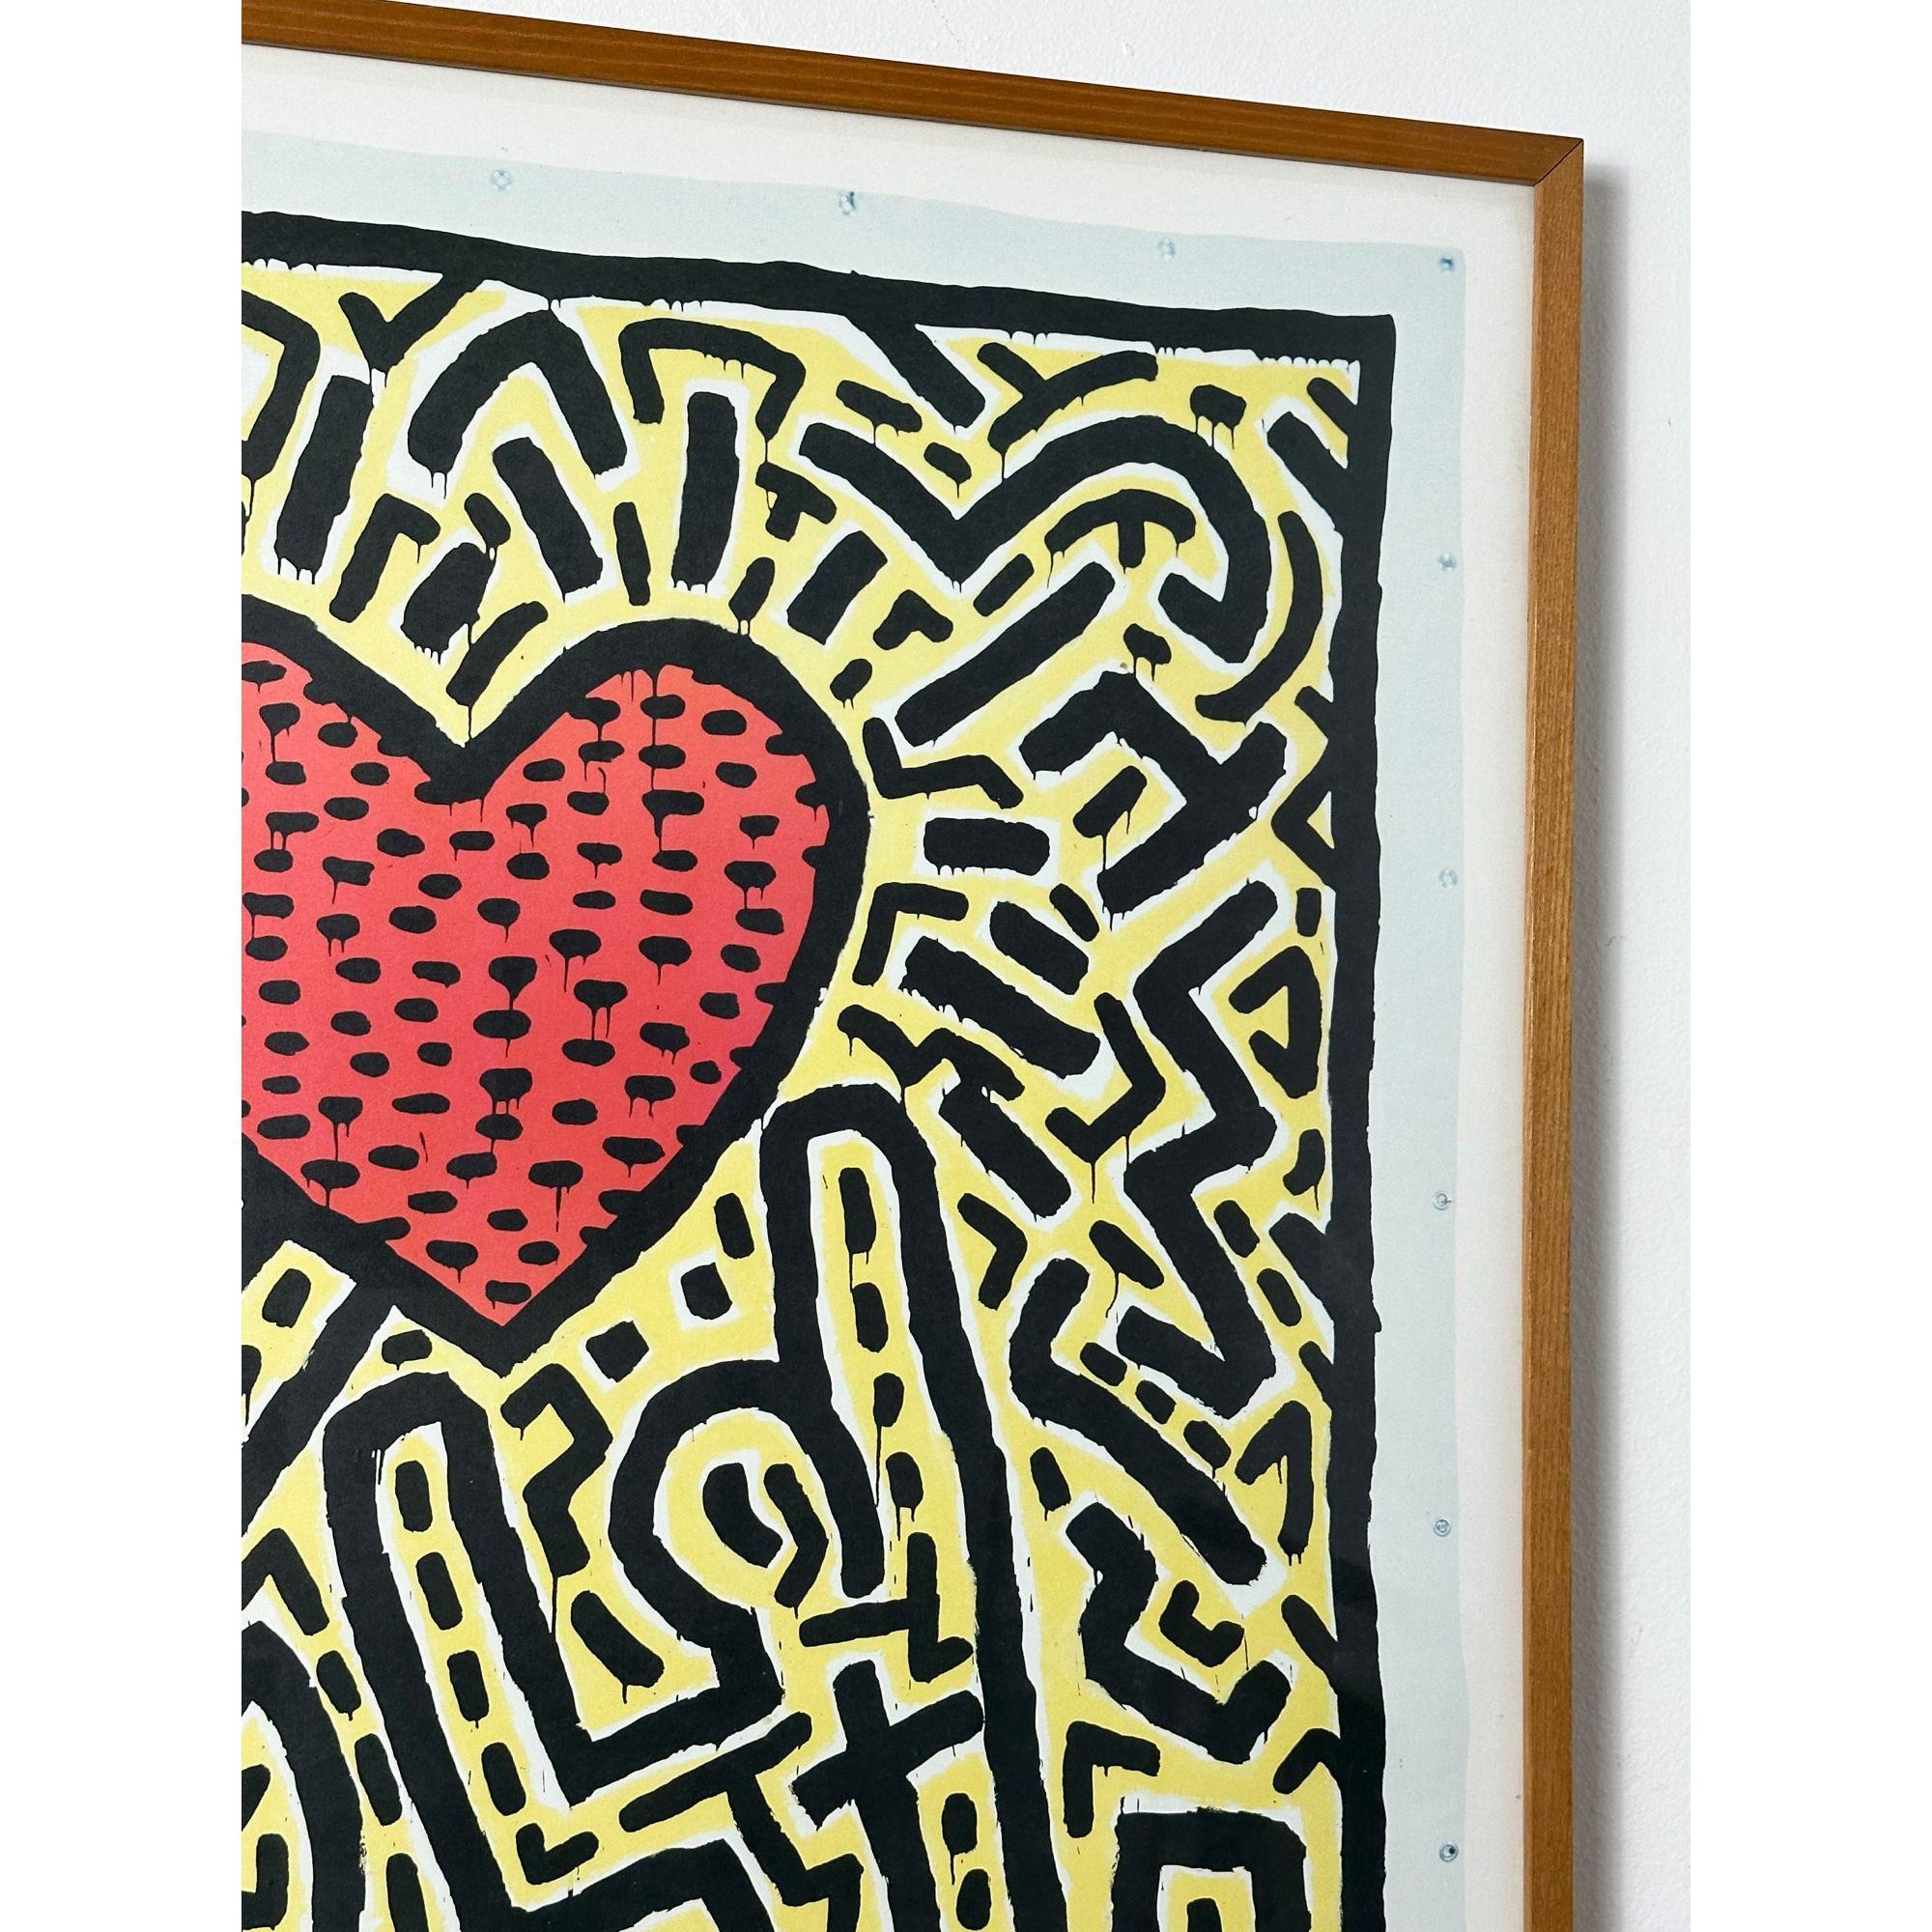 Paper Pop Art Two Figures and Heart Abstract Framed Print by Keith Haring 1982 For Sale